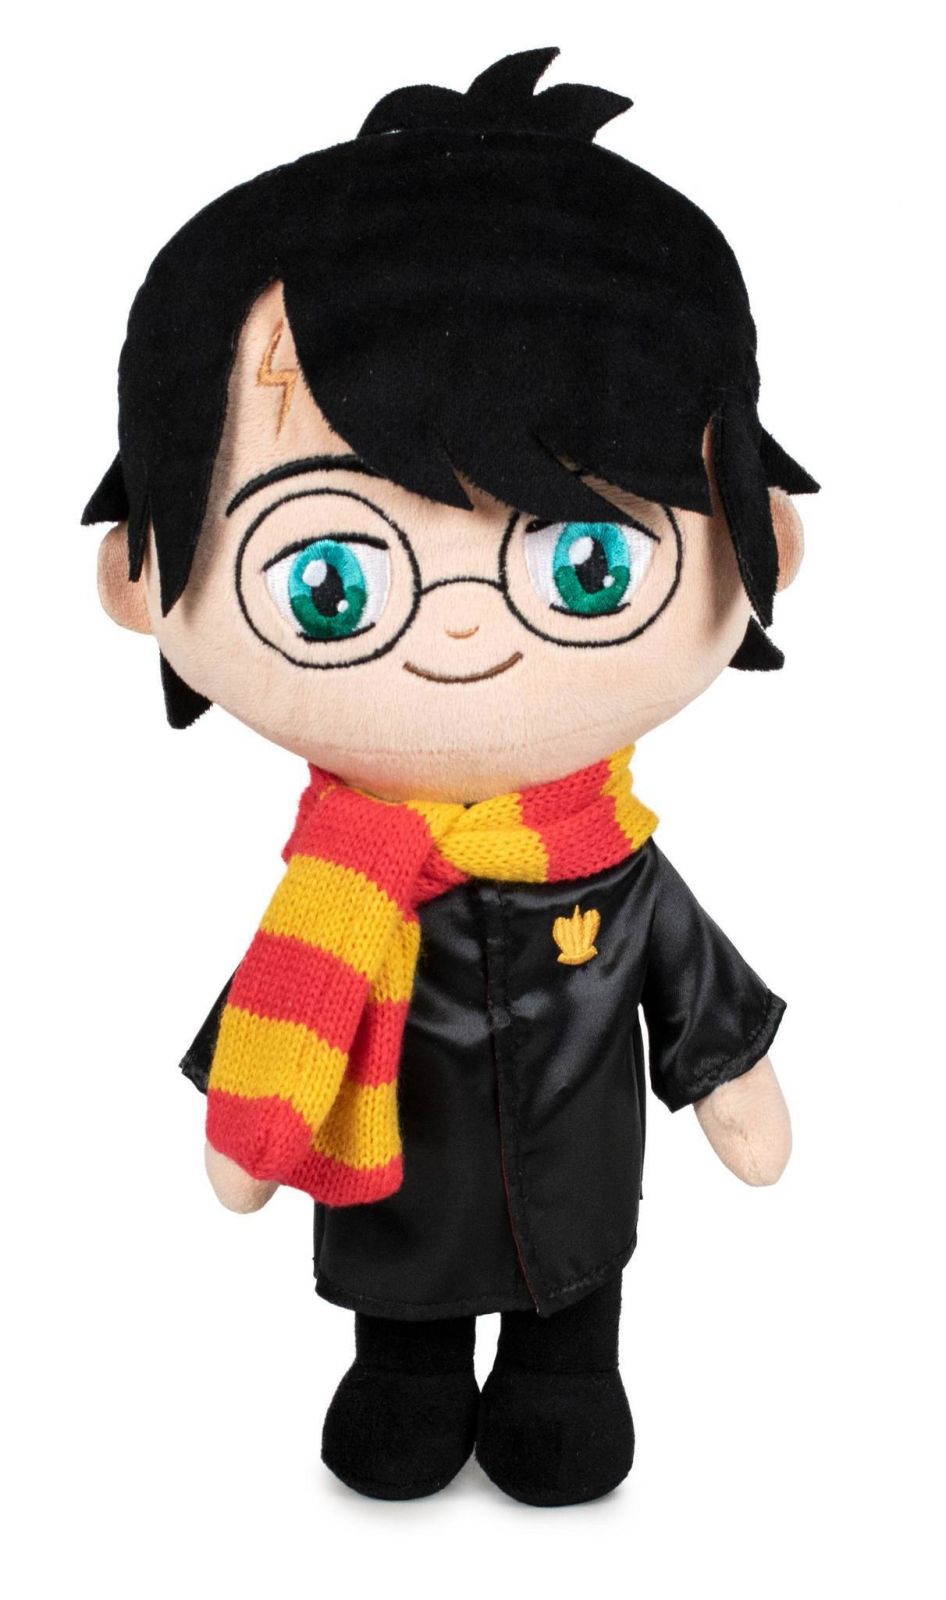 Harry Potter Plush Figure Harry Potter Winter 29 cm Play by Play